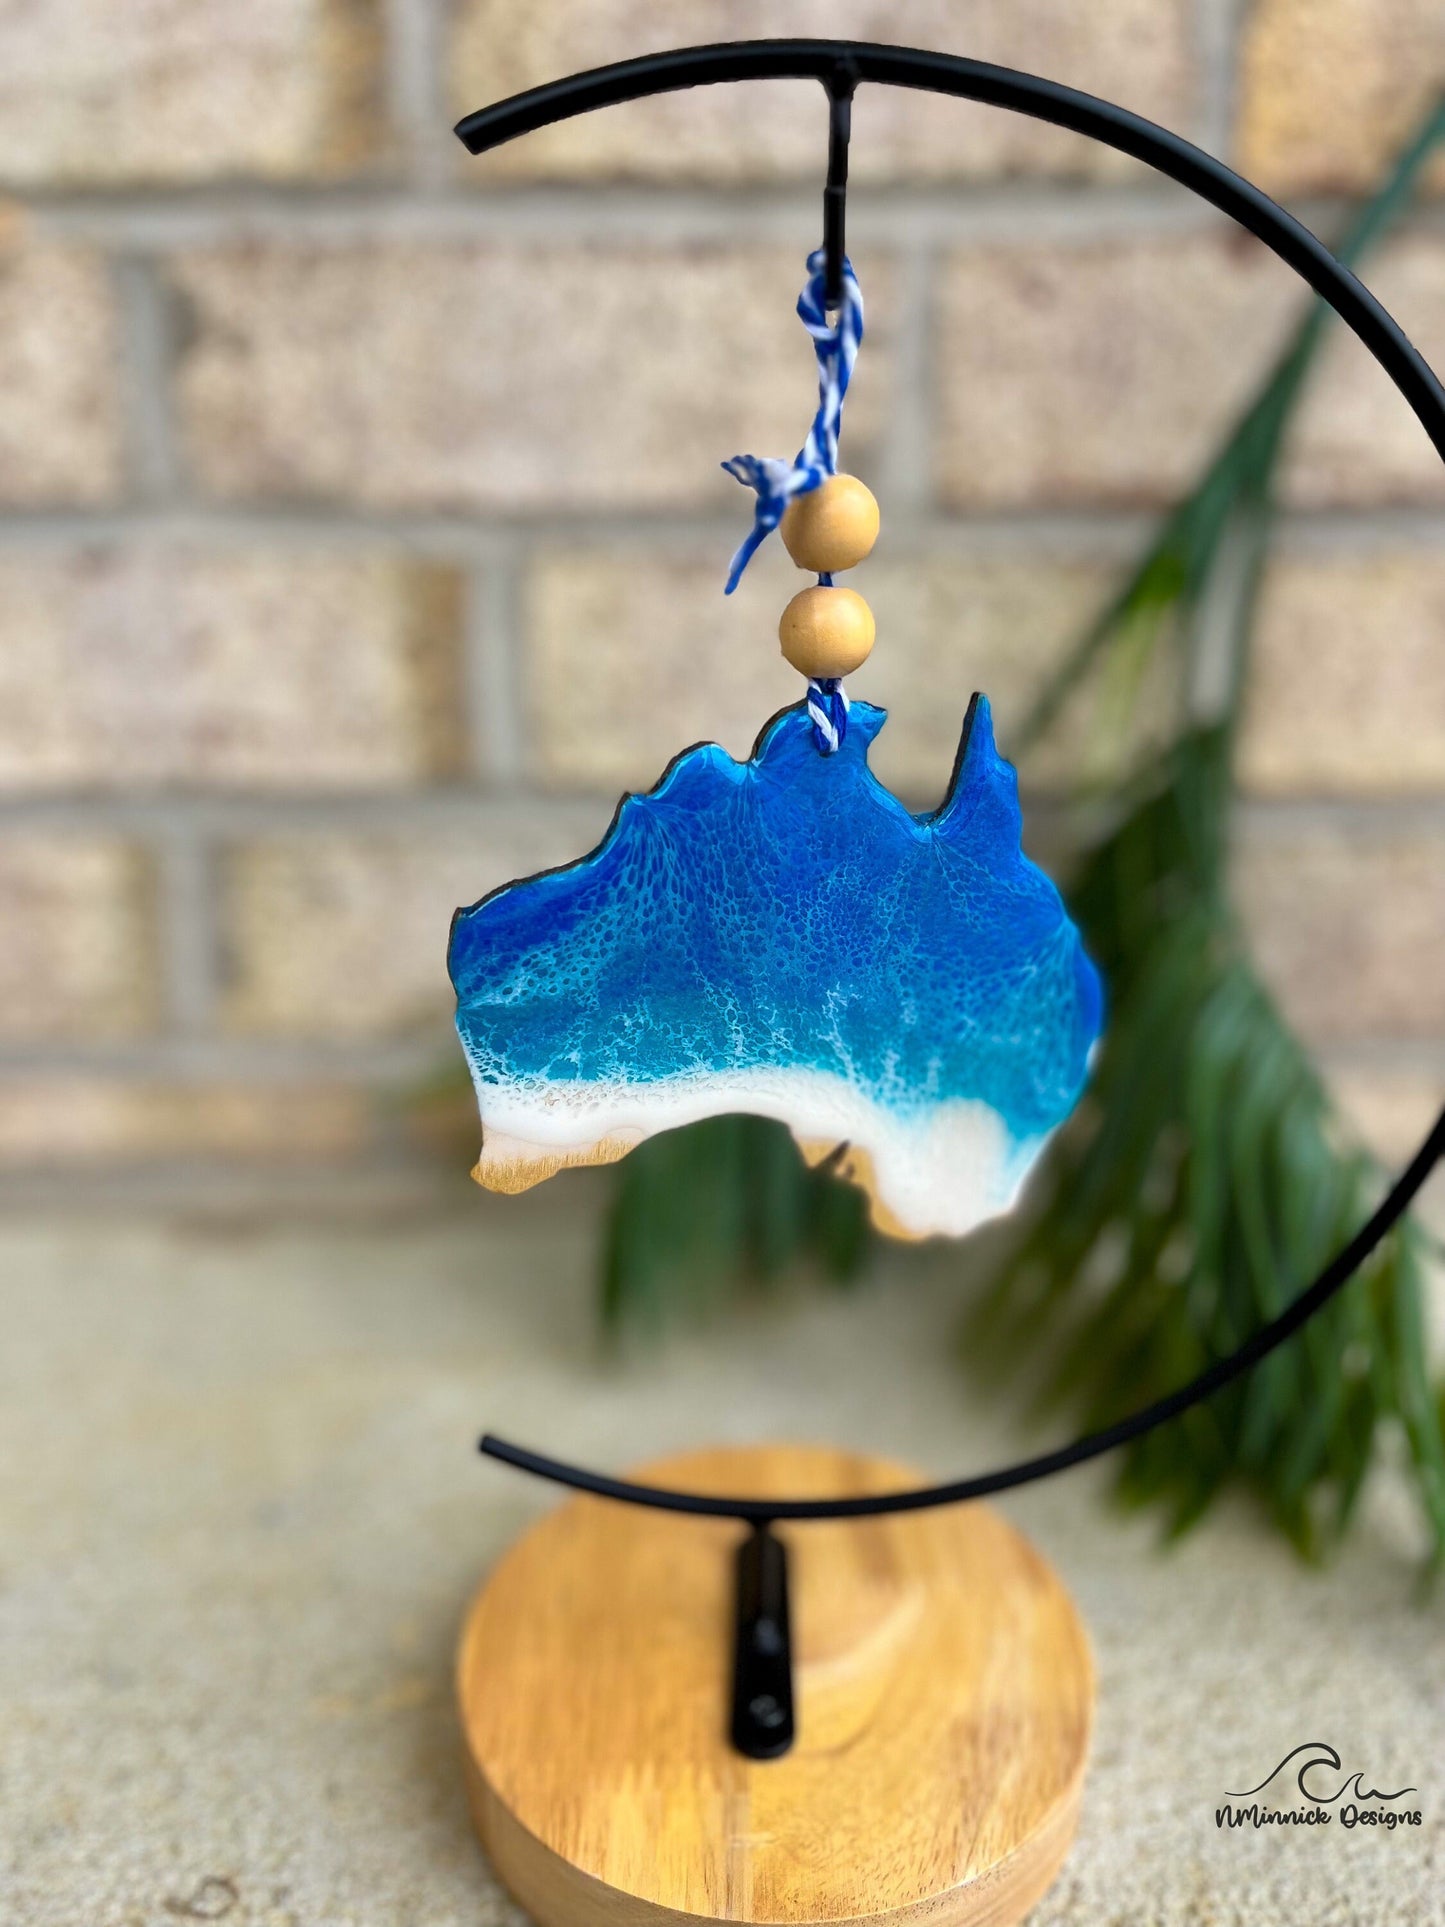 Australia shaped ocean resin ornament hanging on an ornament stand.